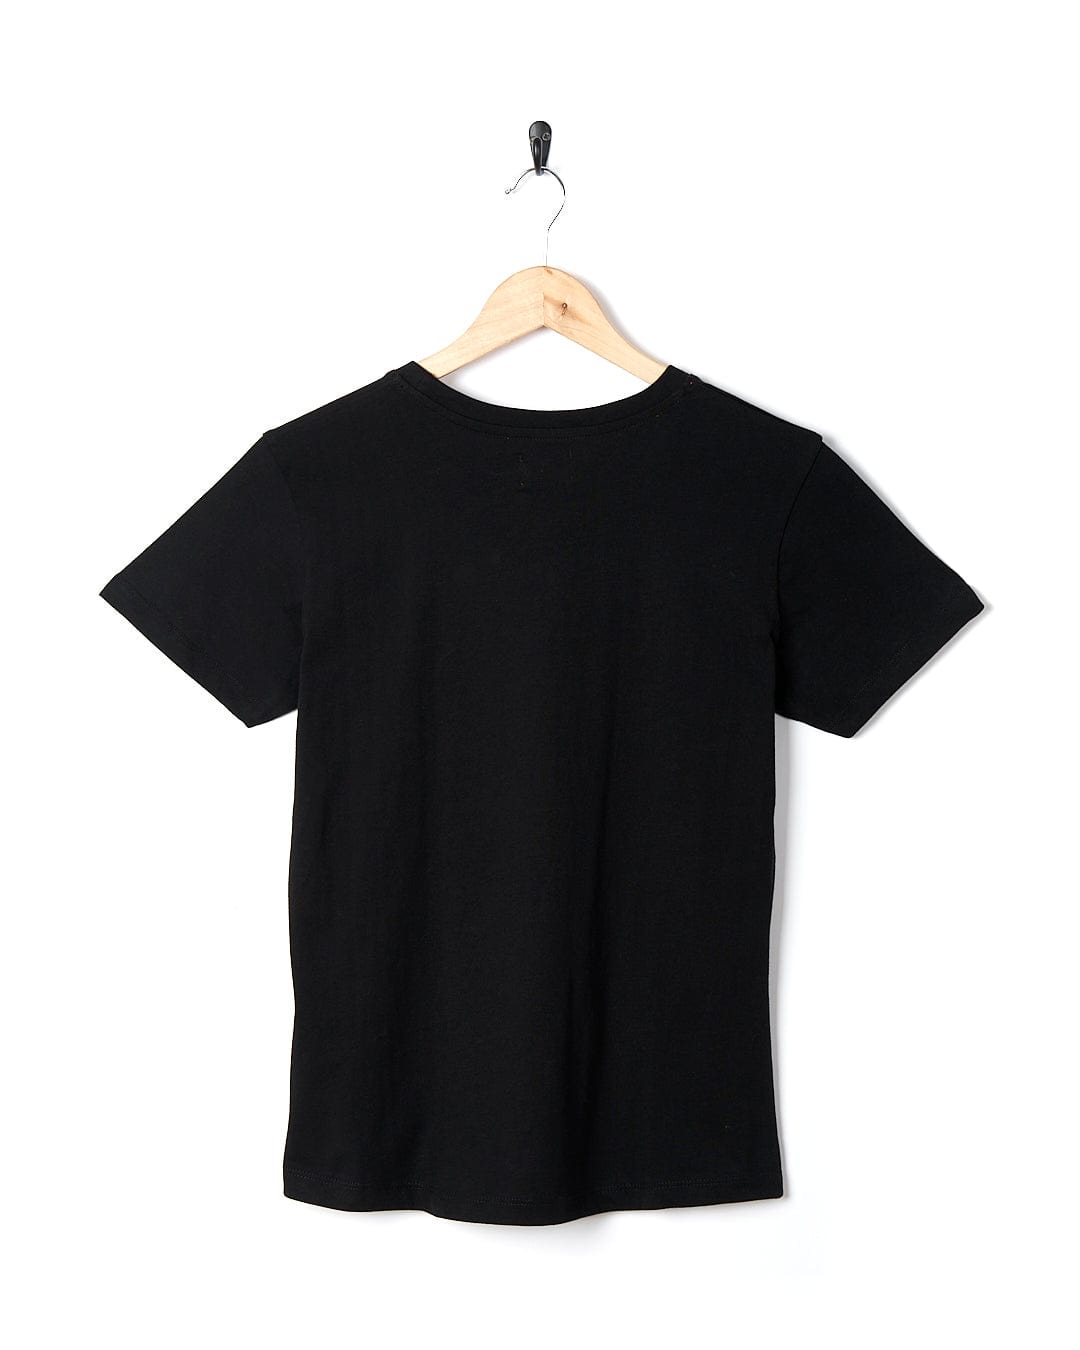 A Saltrock Purfect Wave Gradient - Womens Short Sleeve T-Shirt in black hanging on a wooden hanger.